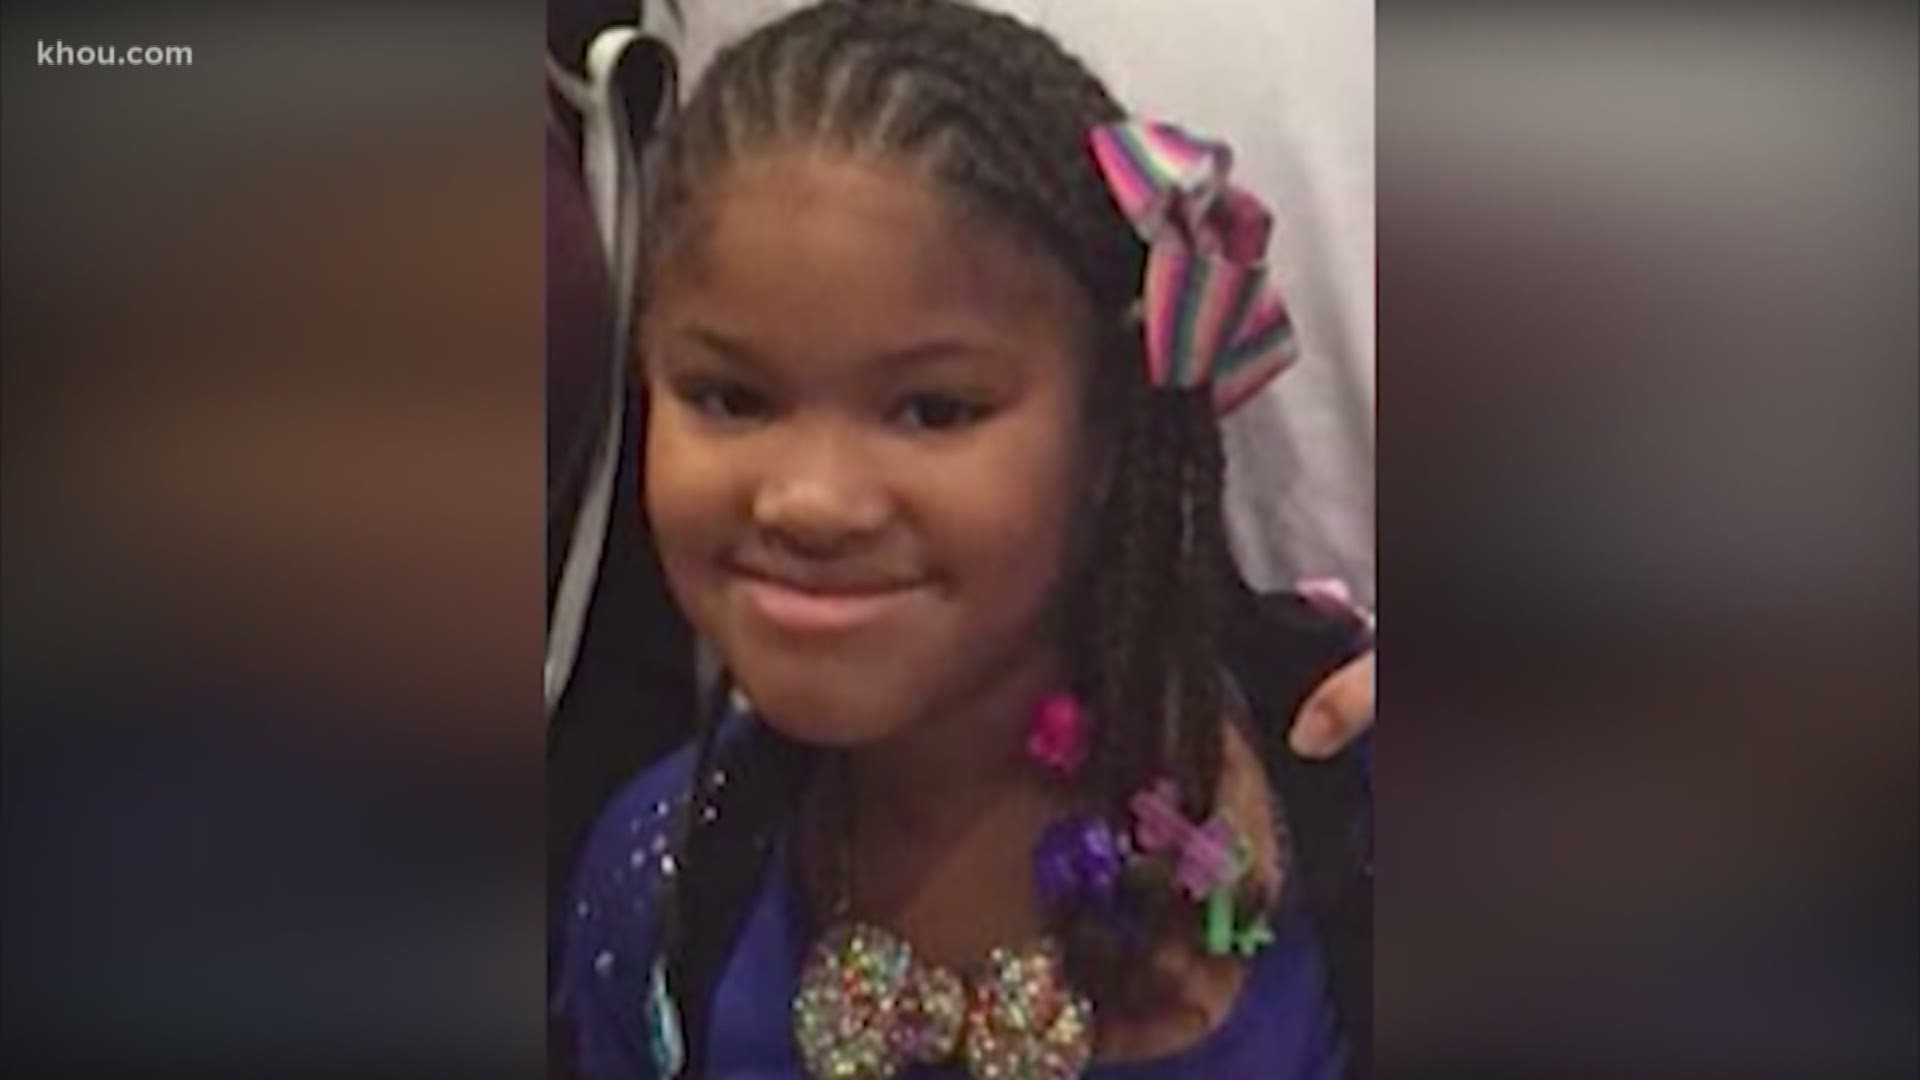 A suspect in the death of 7-year-old Jazmine Barnes is out of jail on bond.